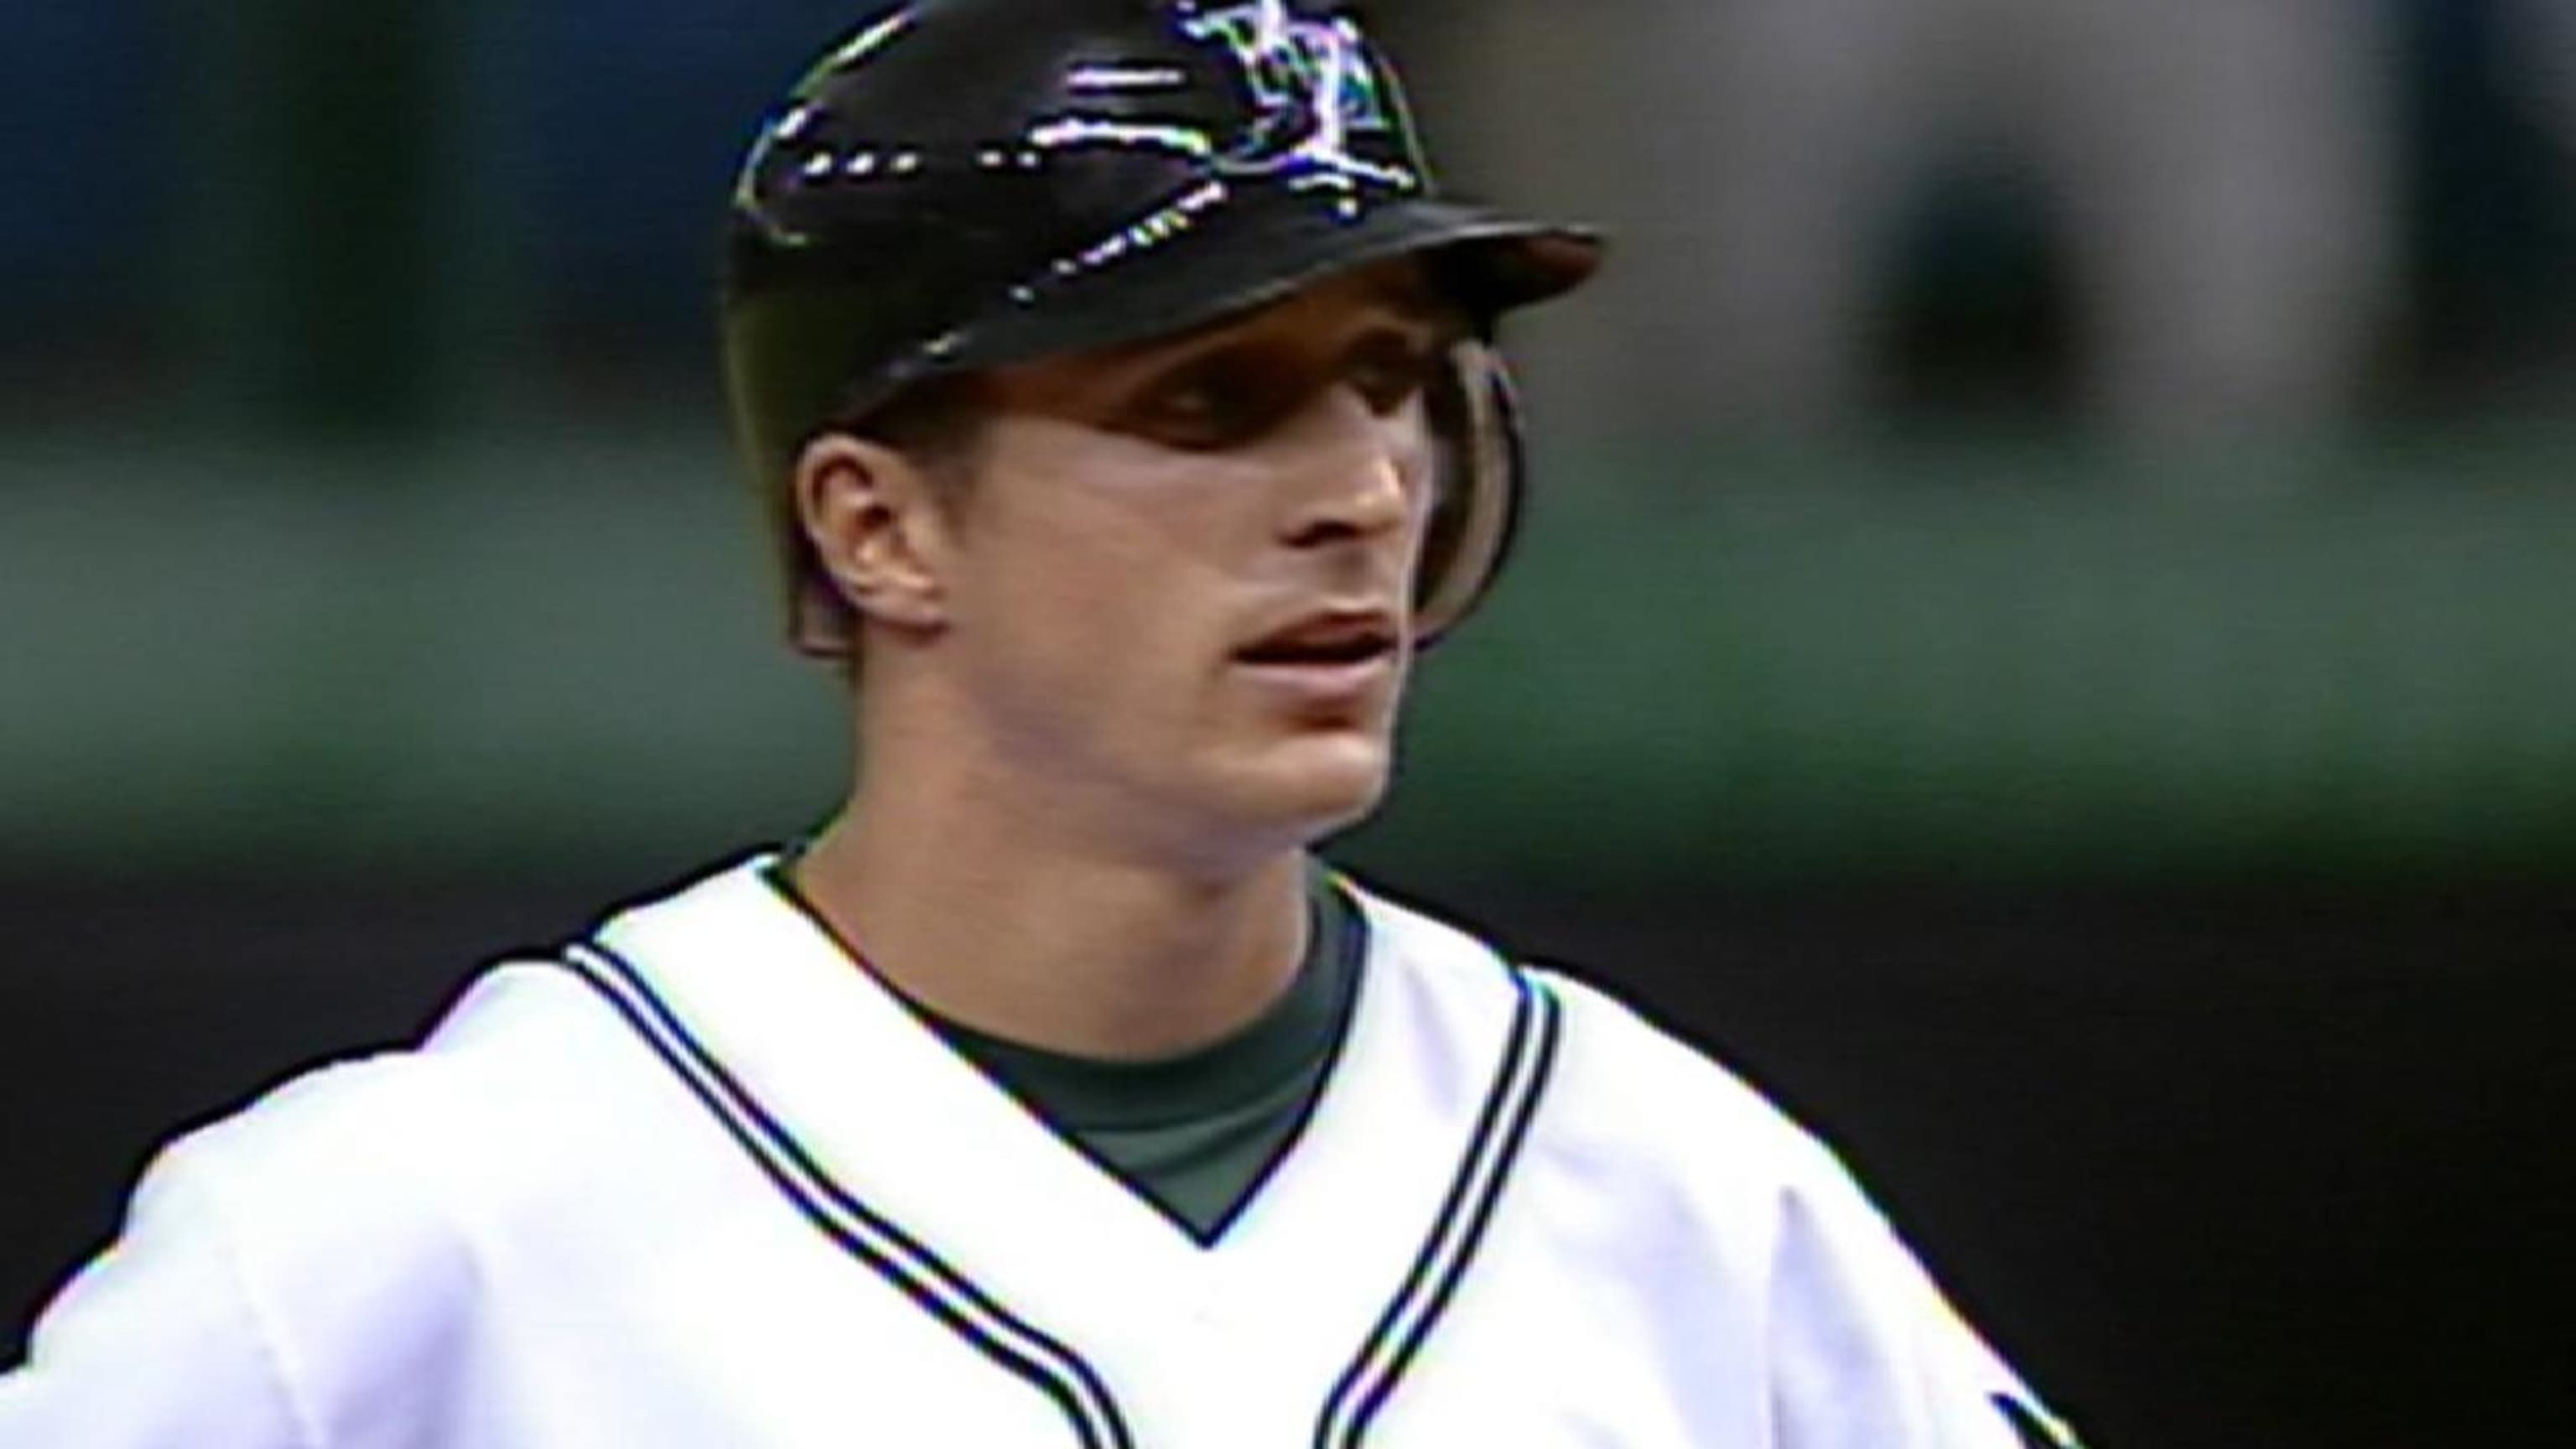 25 years later, the “Devil Rays” were in the World Series - DRaysBay